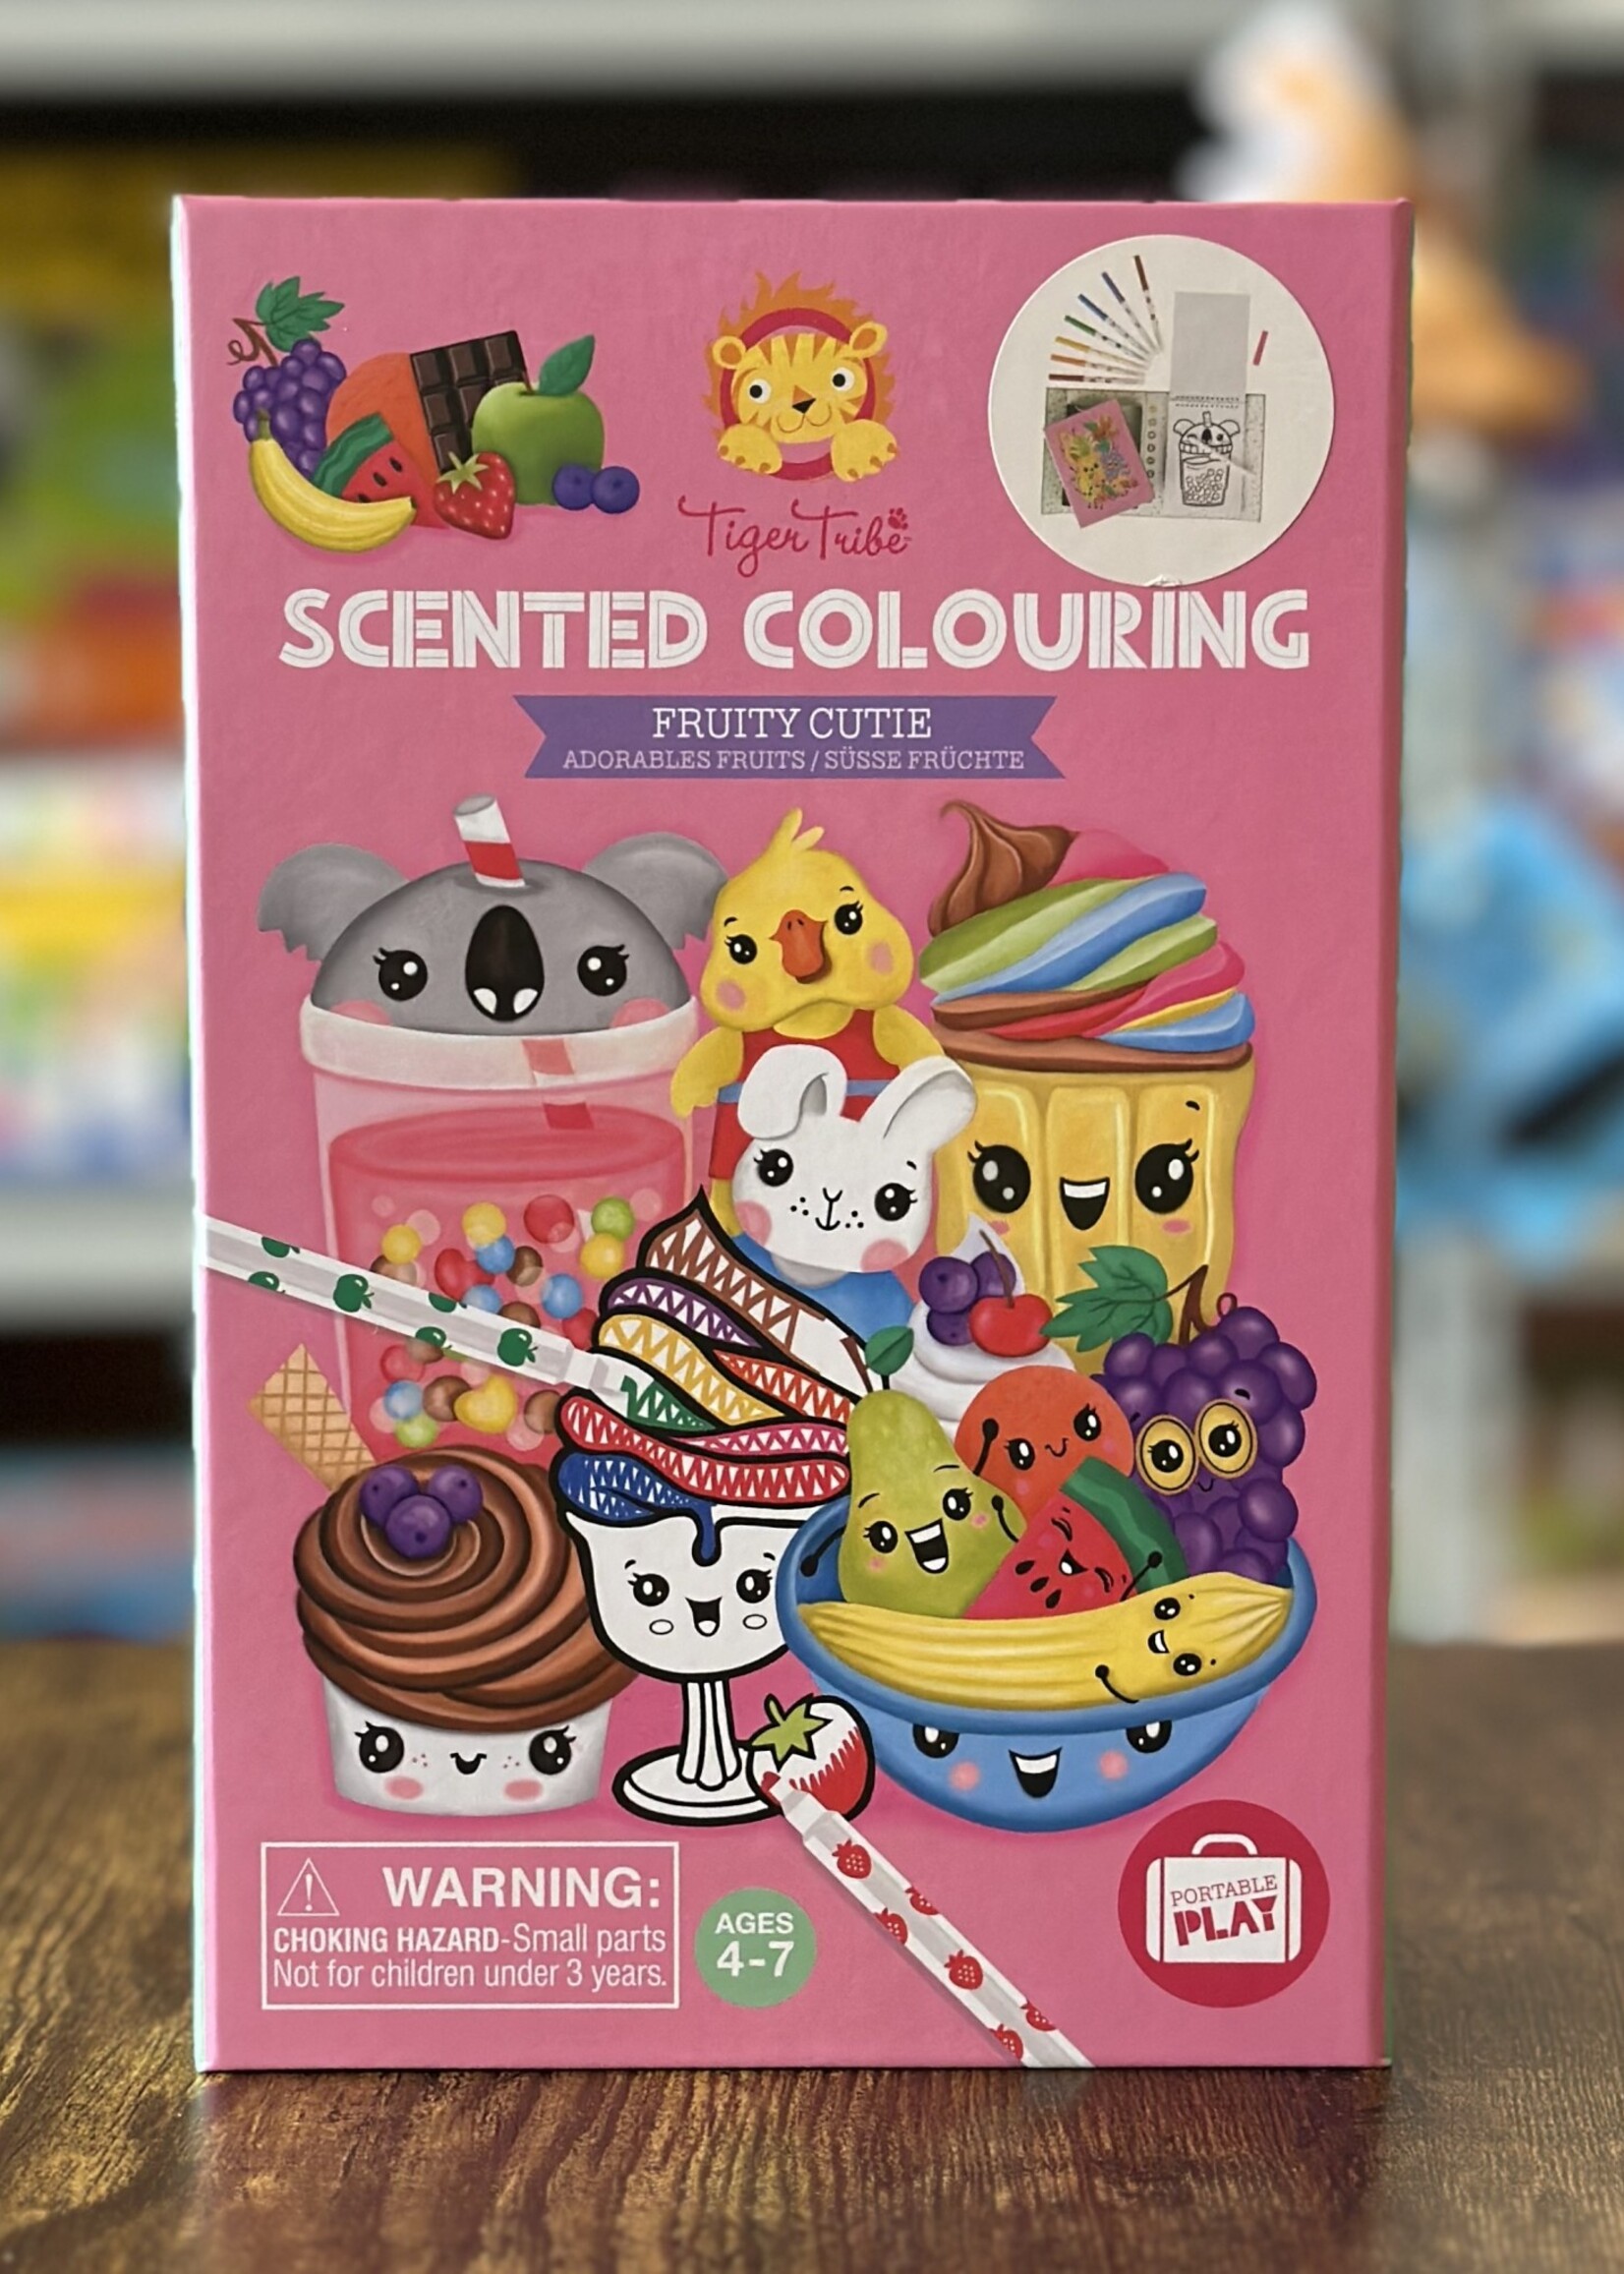 Tiger Tribe Scented Colouring - Fruity Cuite